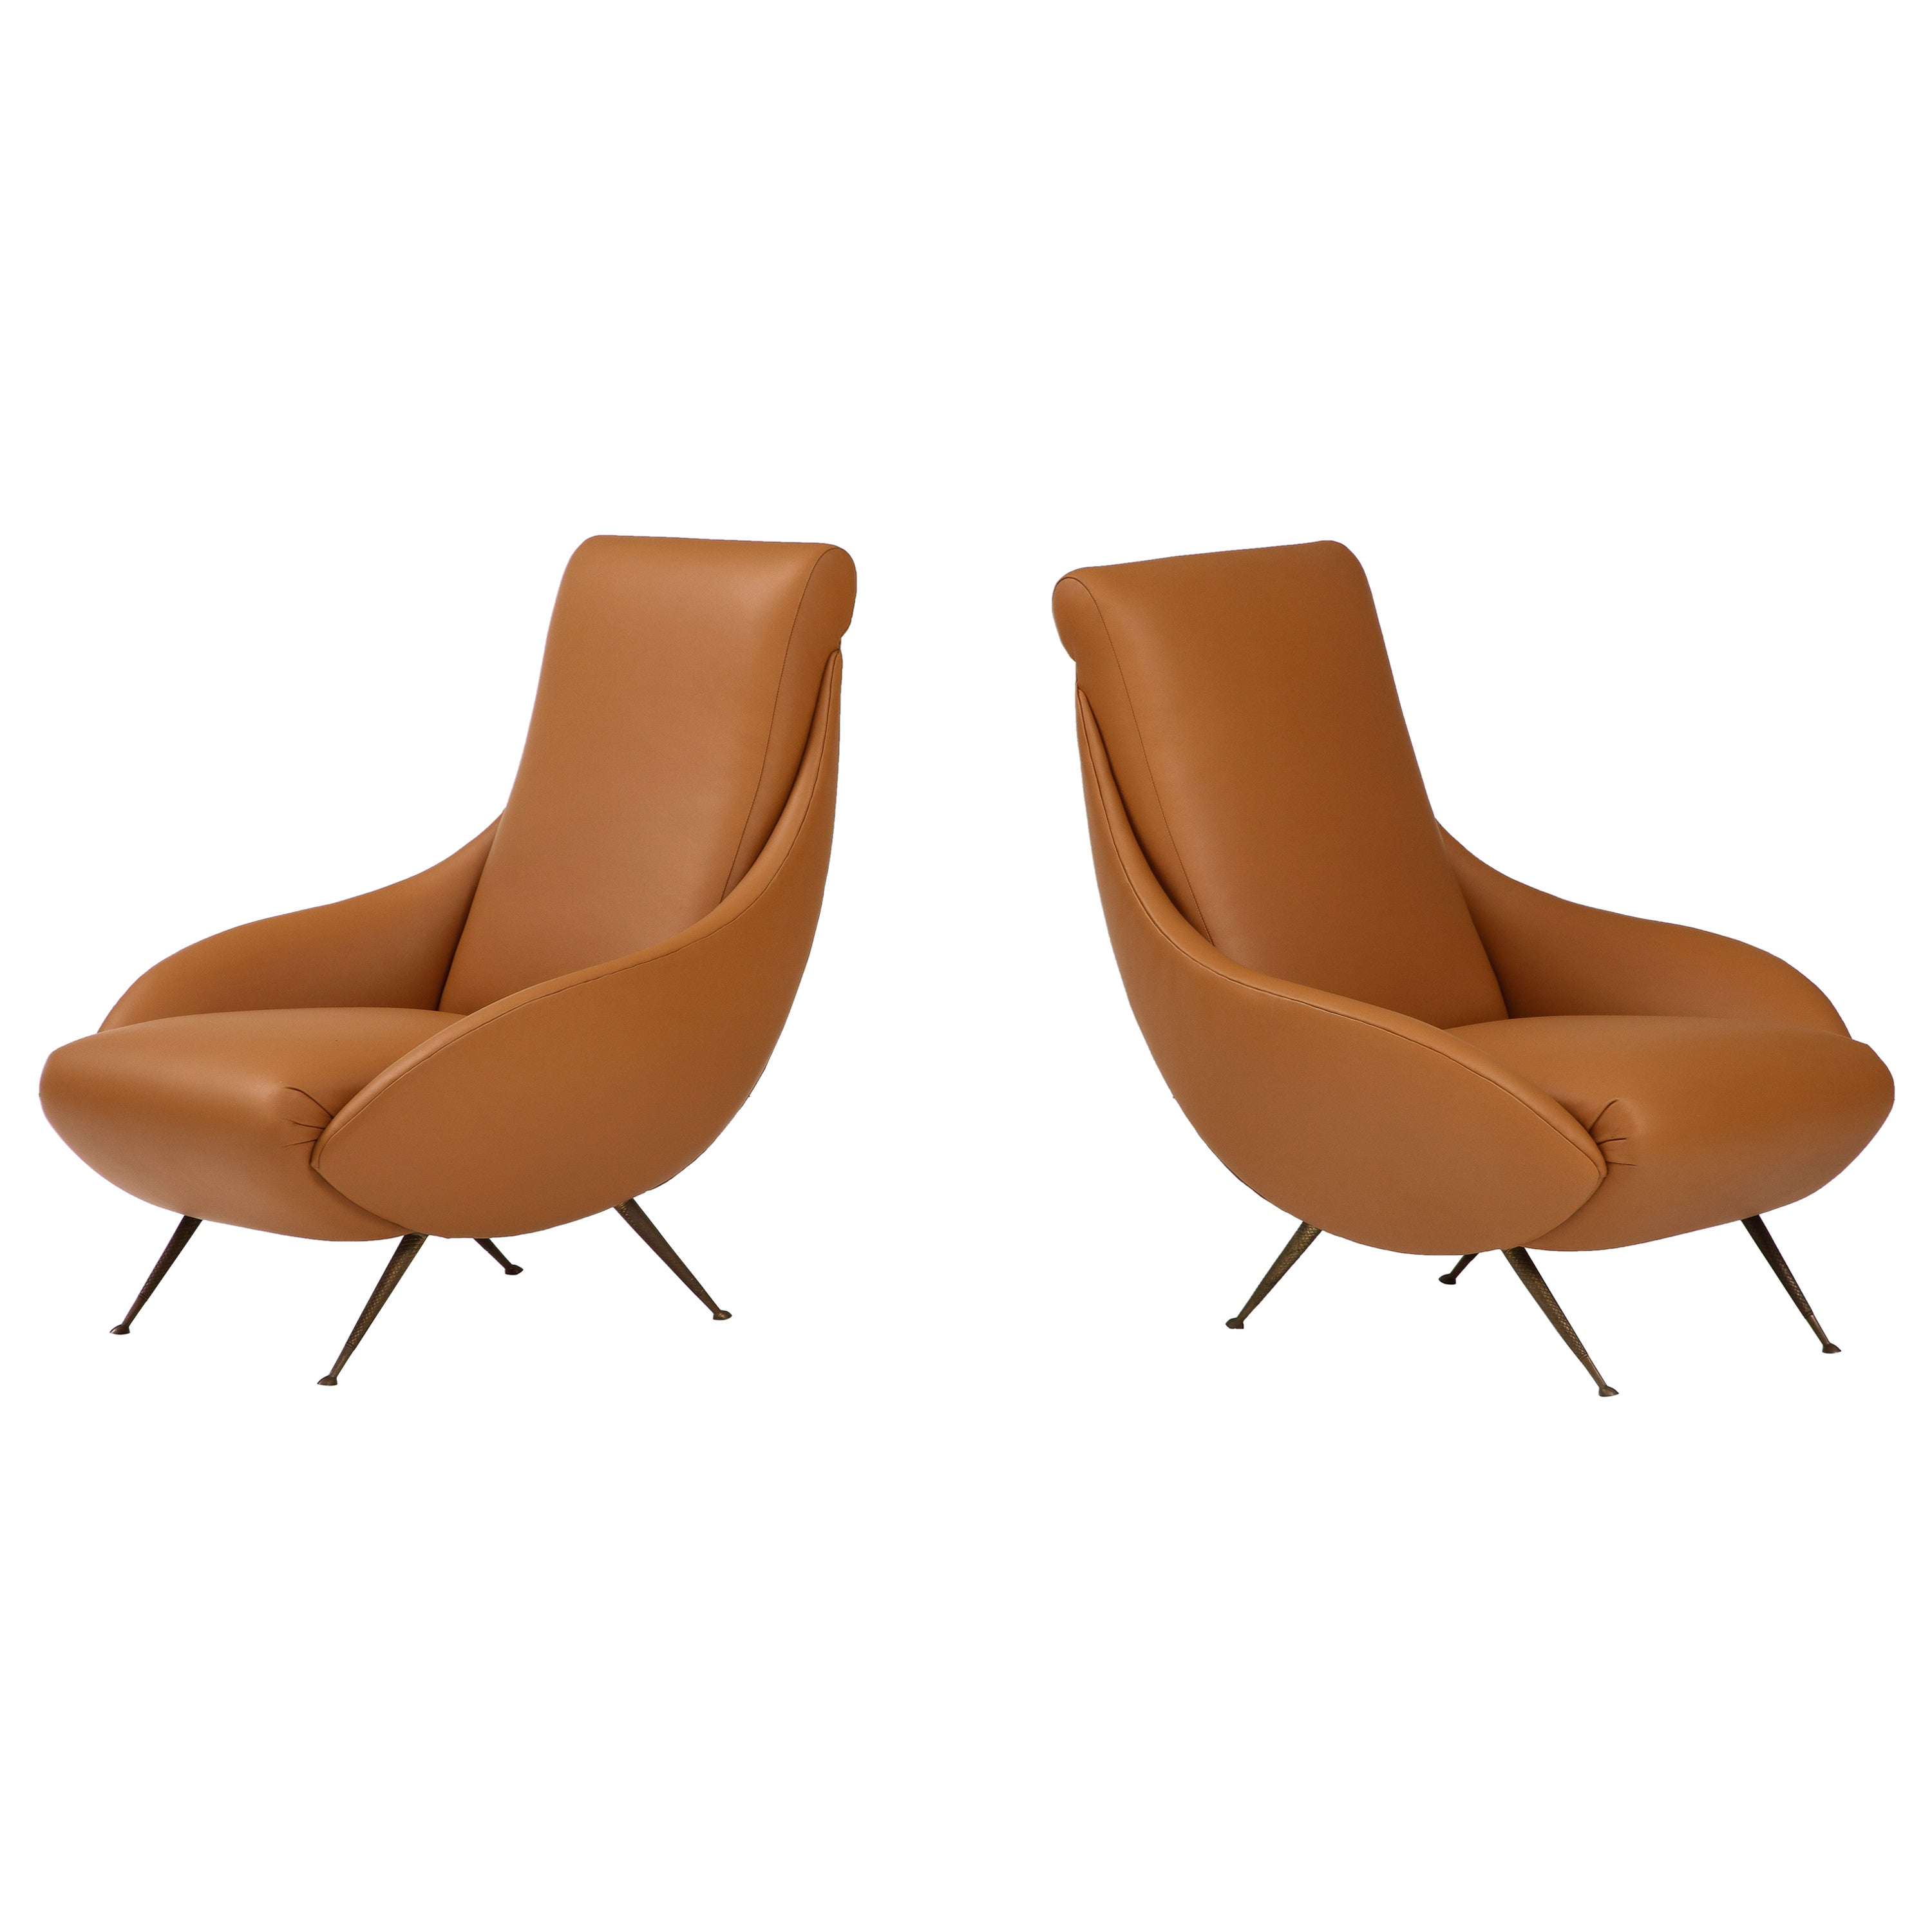 Pair of Italian Modernist Leather Lounge, Slipper Chairs , Italy, circa 1950 For Sale